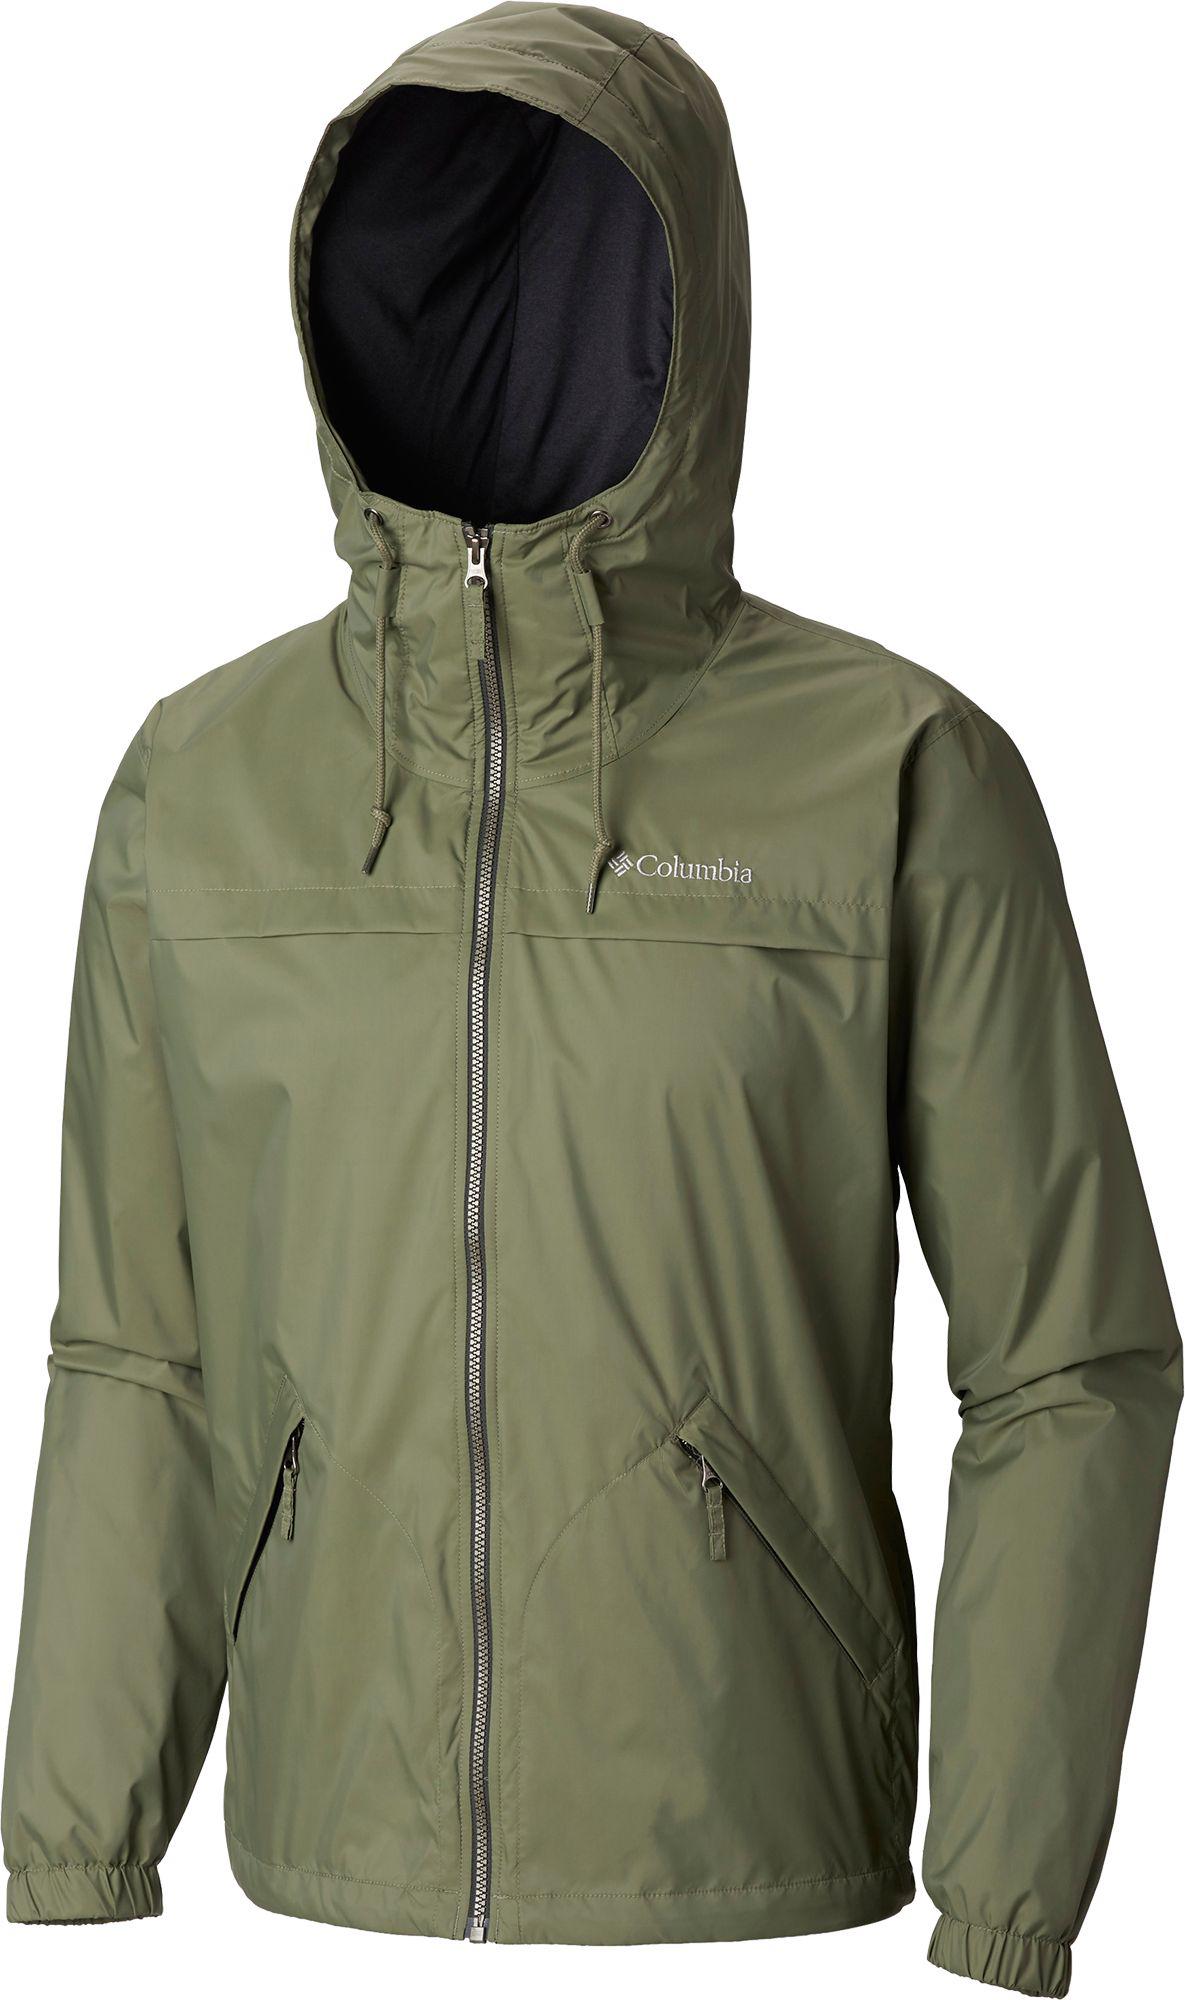 Columbia Synthetic Oroville Creek Lined Rain Jacket in Green for Men - Lyst